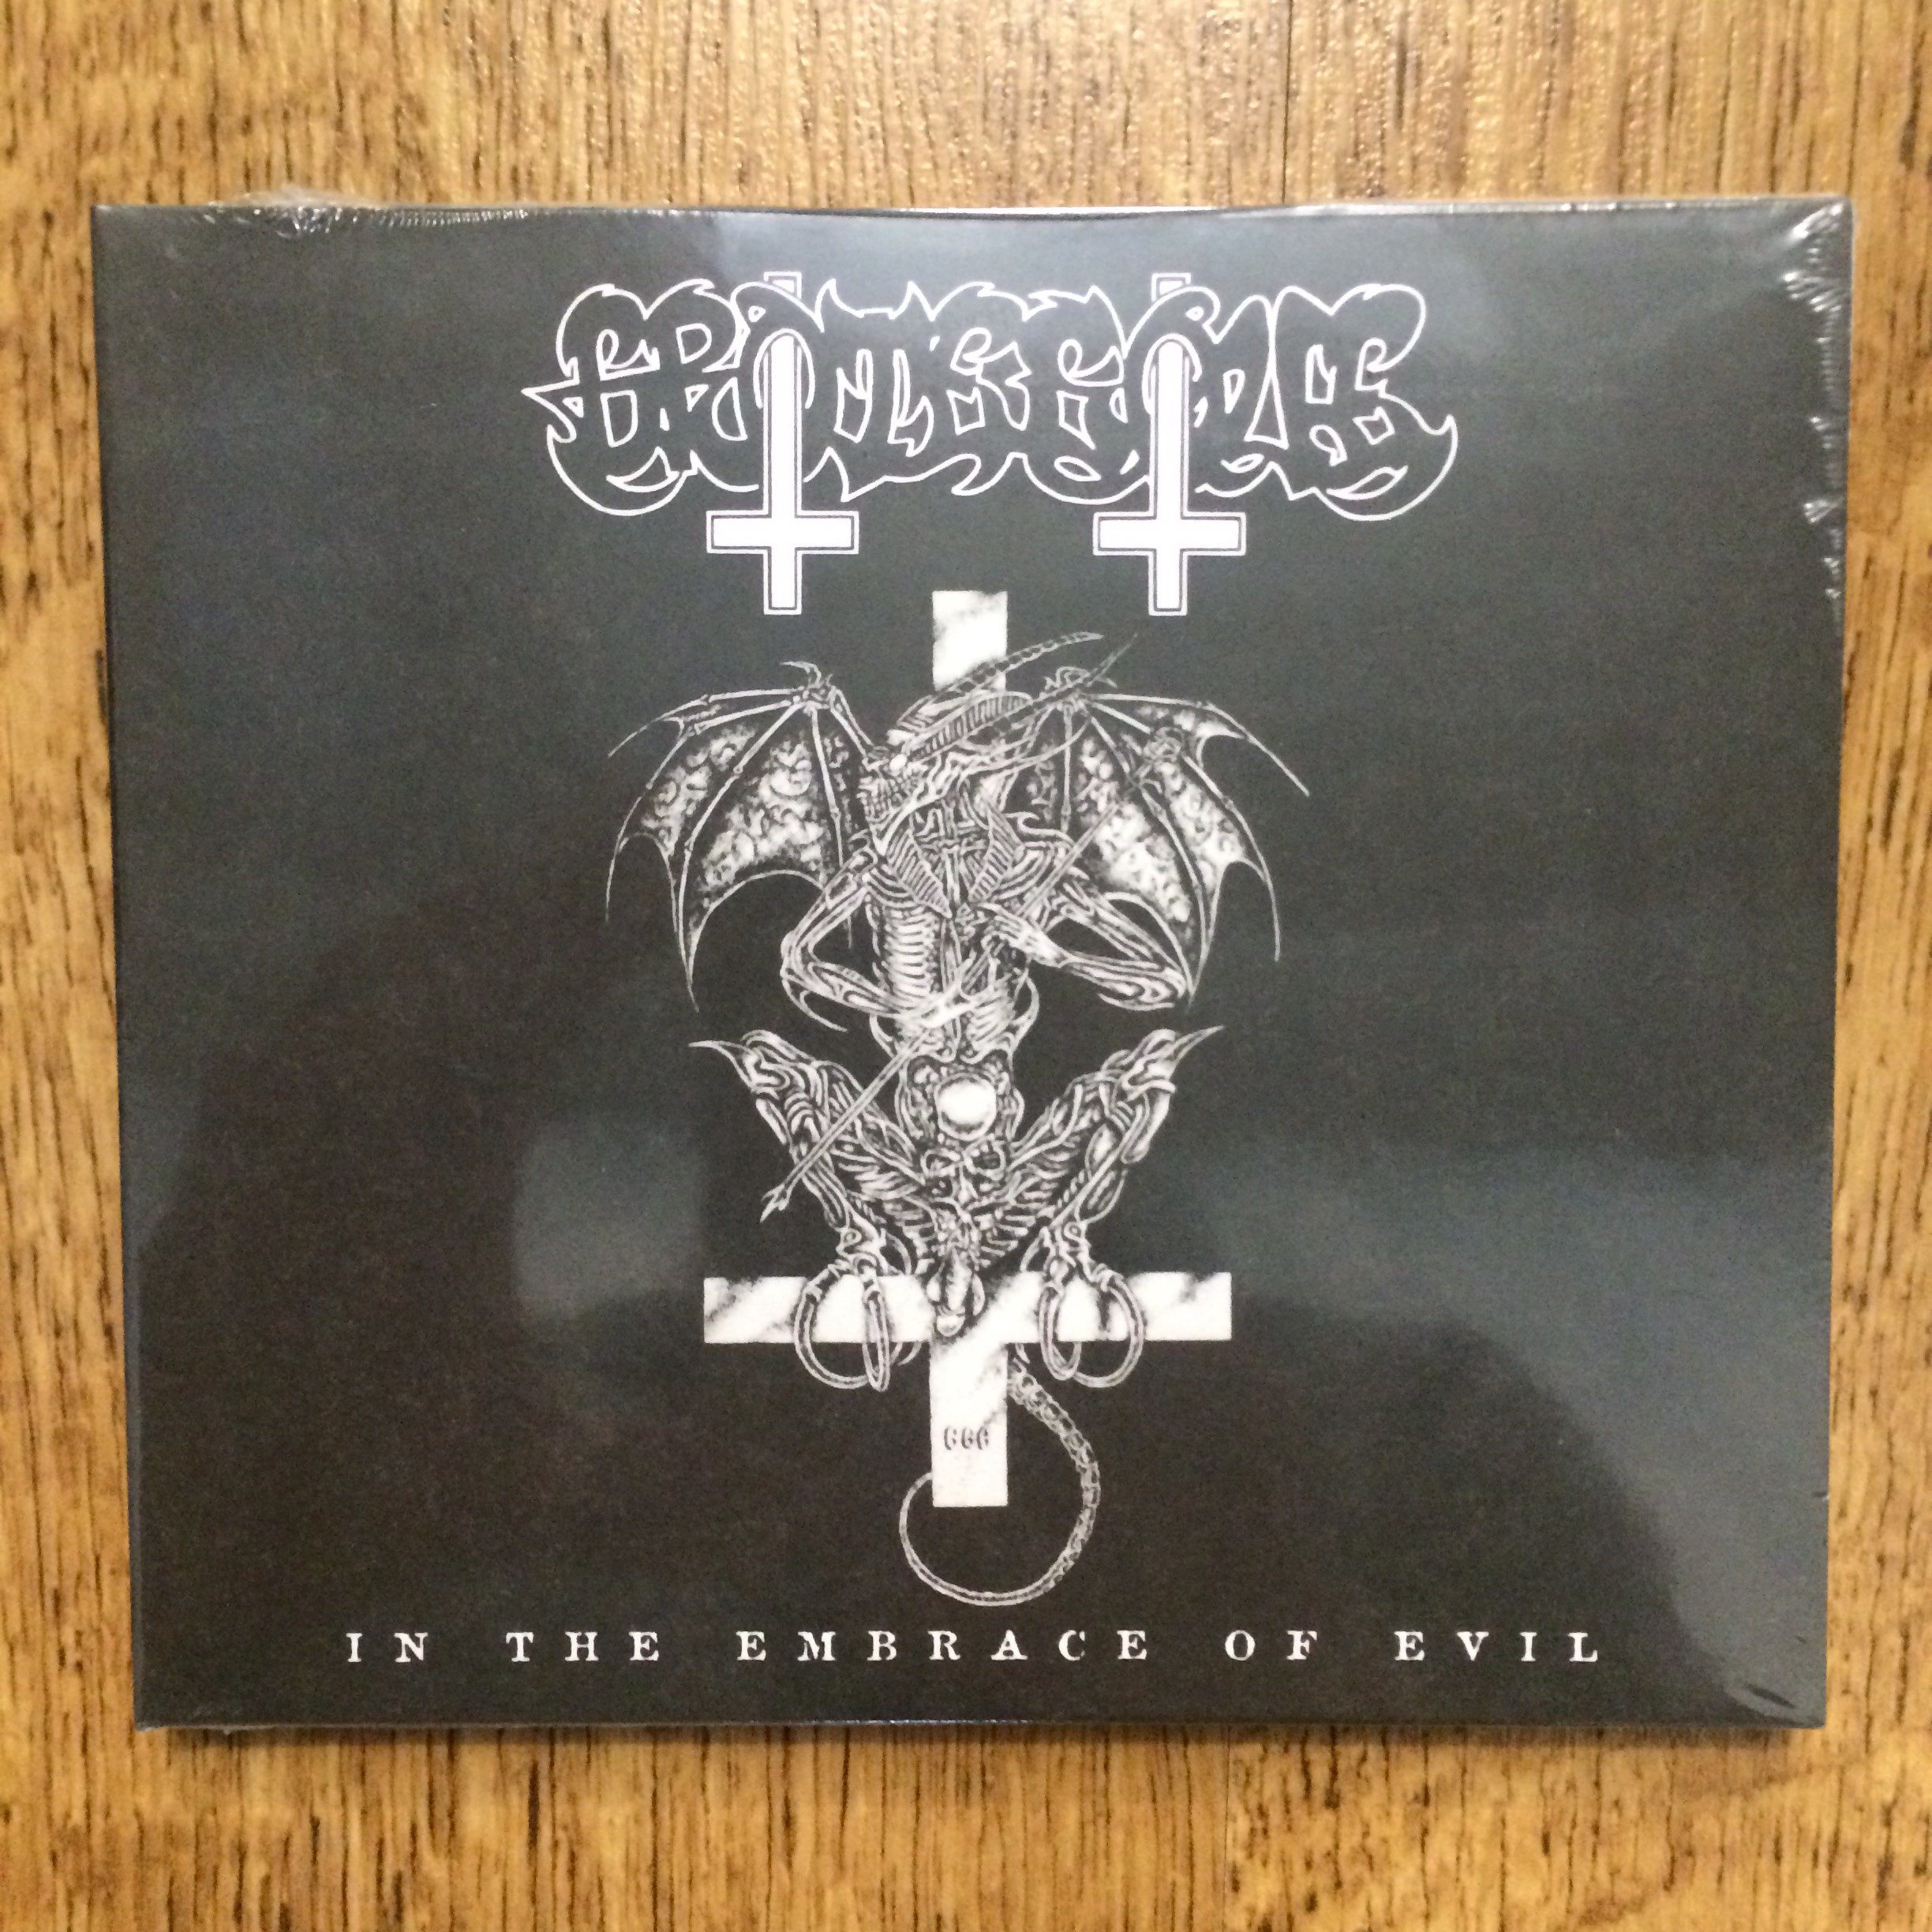 Photo of the Grotesque - "In the Embrace of Evil" CD